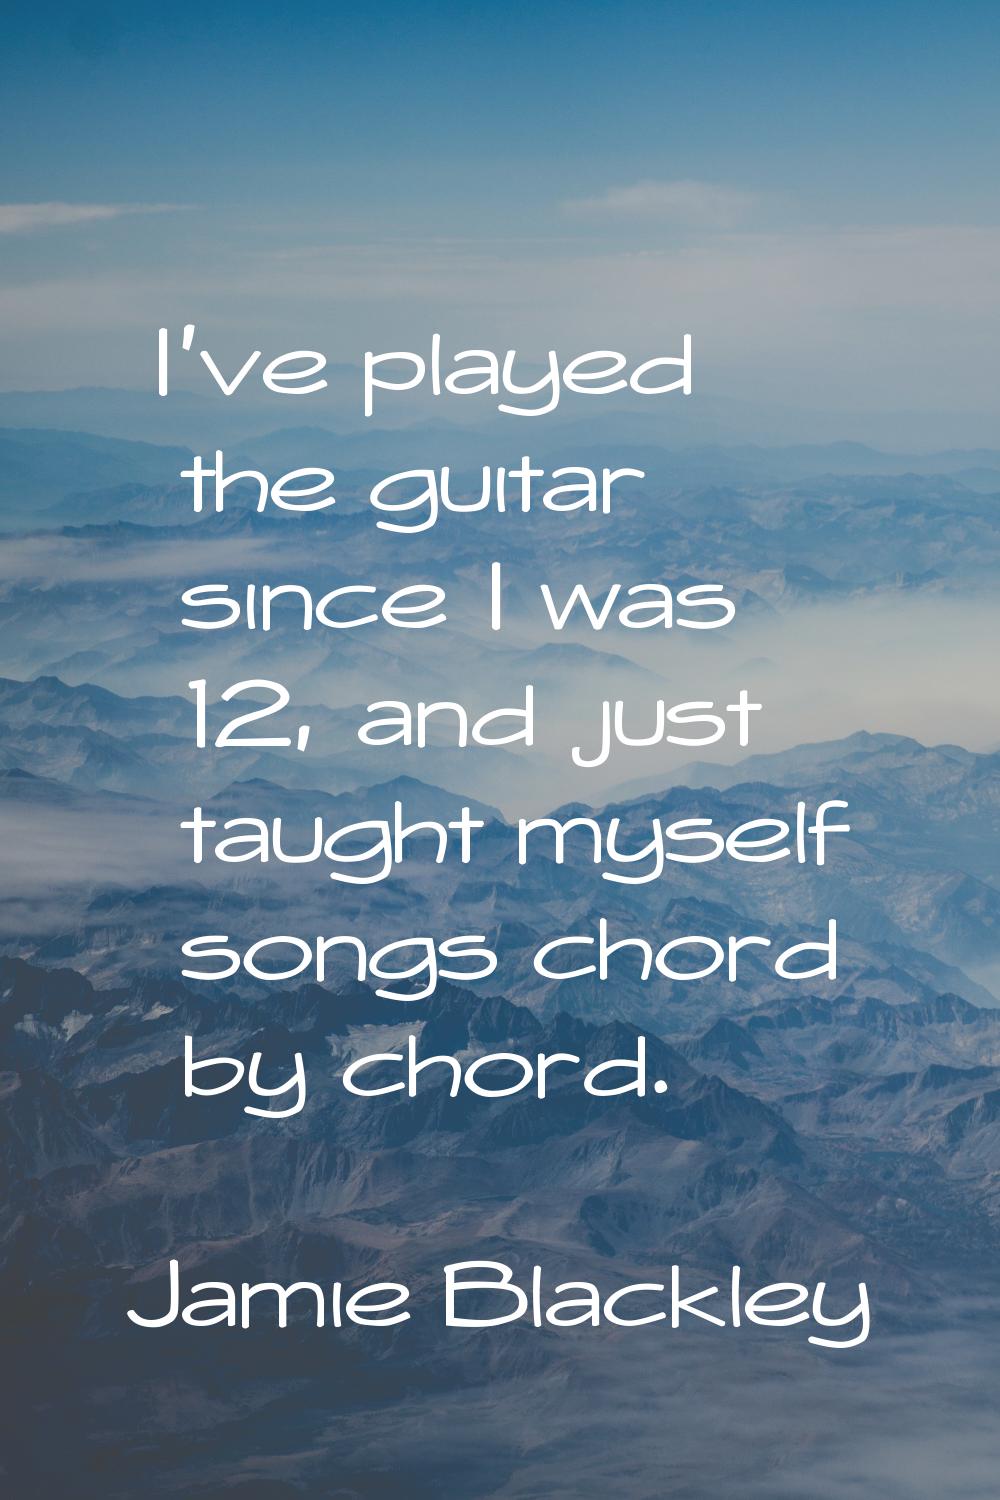 I've played the guitar since I was 12, and just taught myself songs chord by chord.